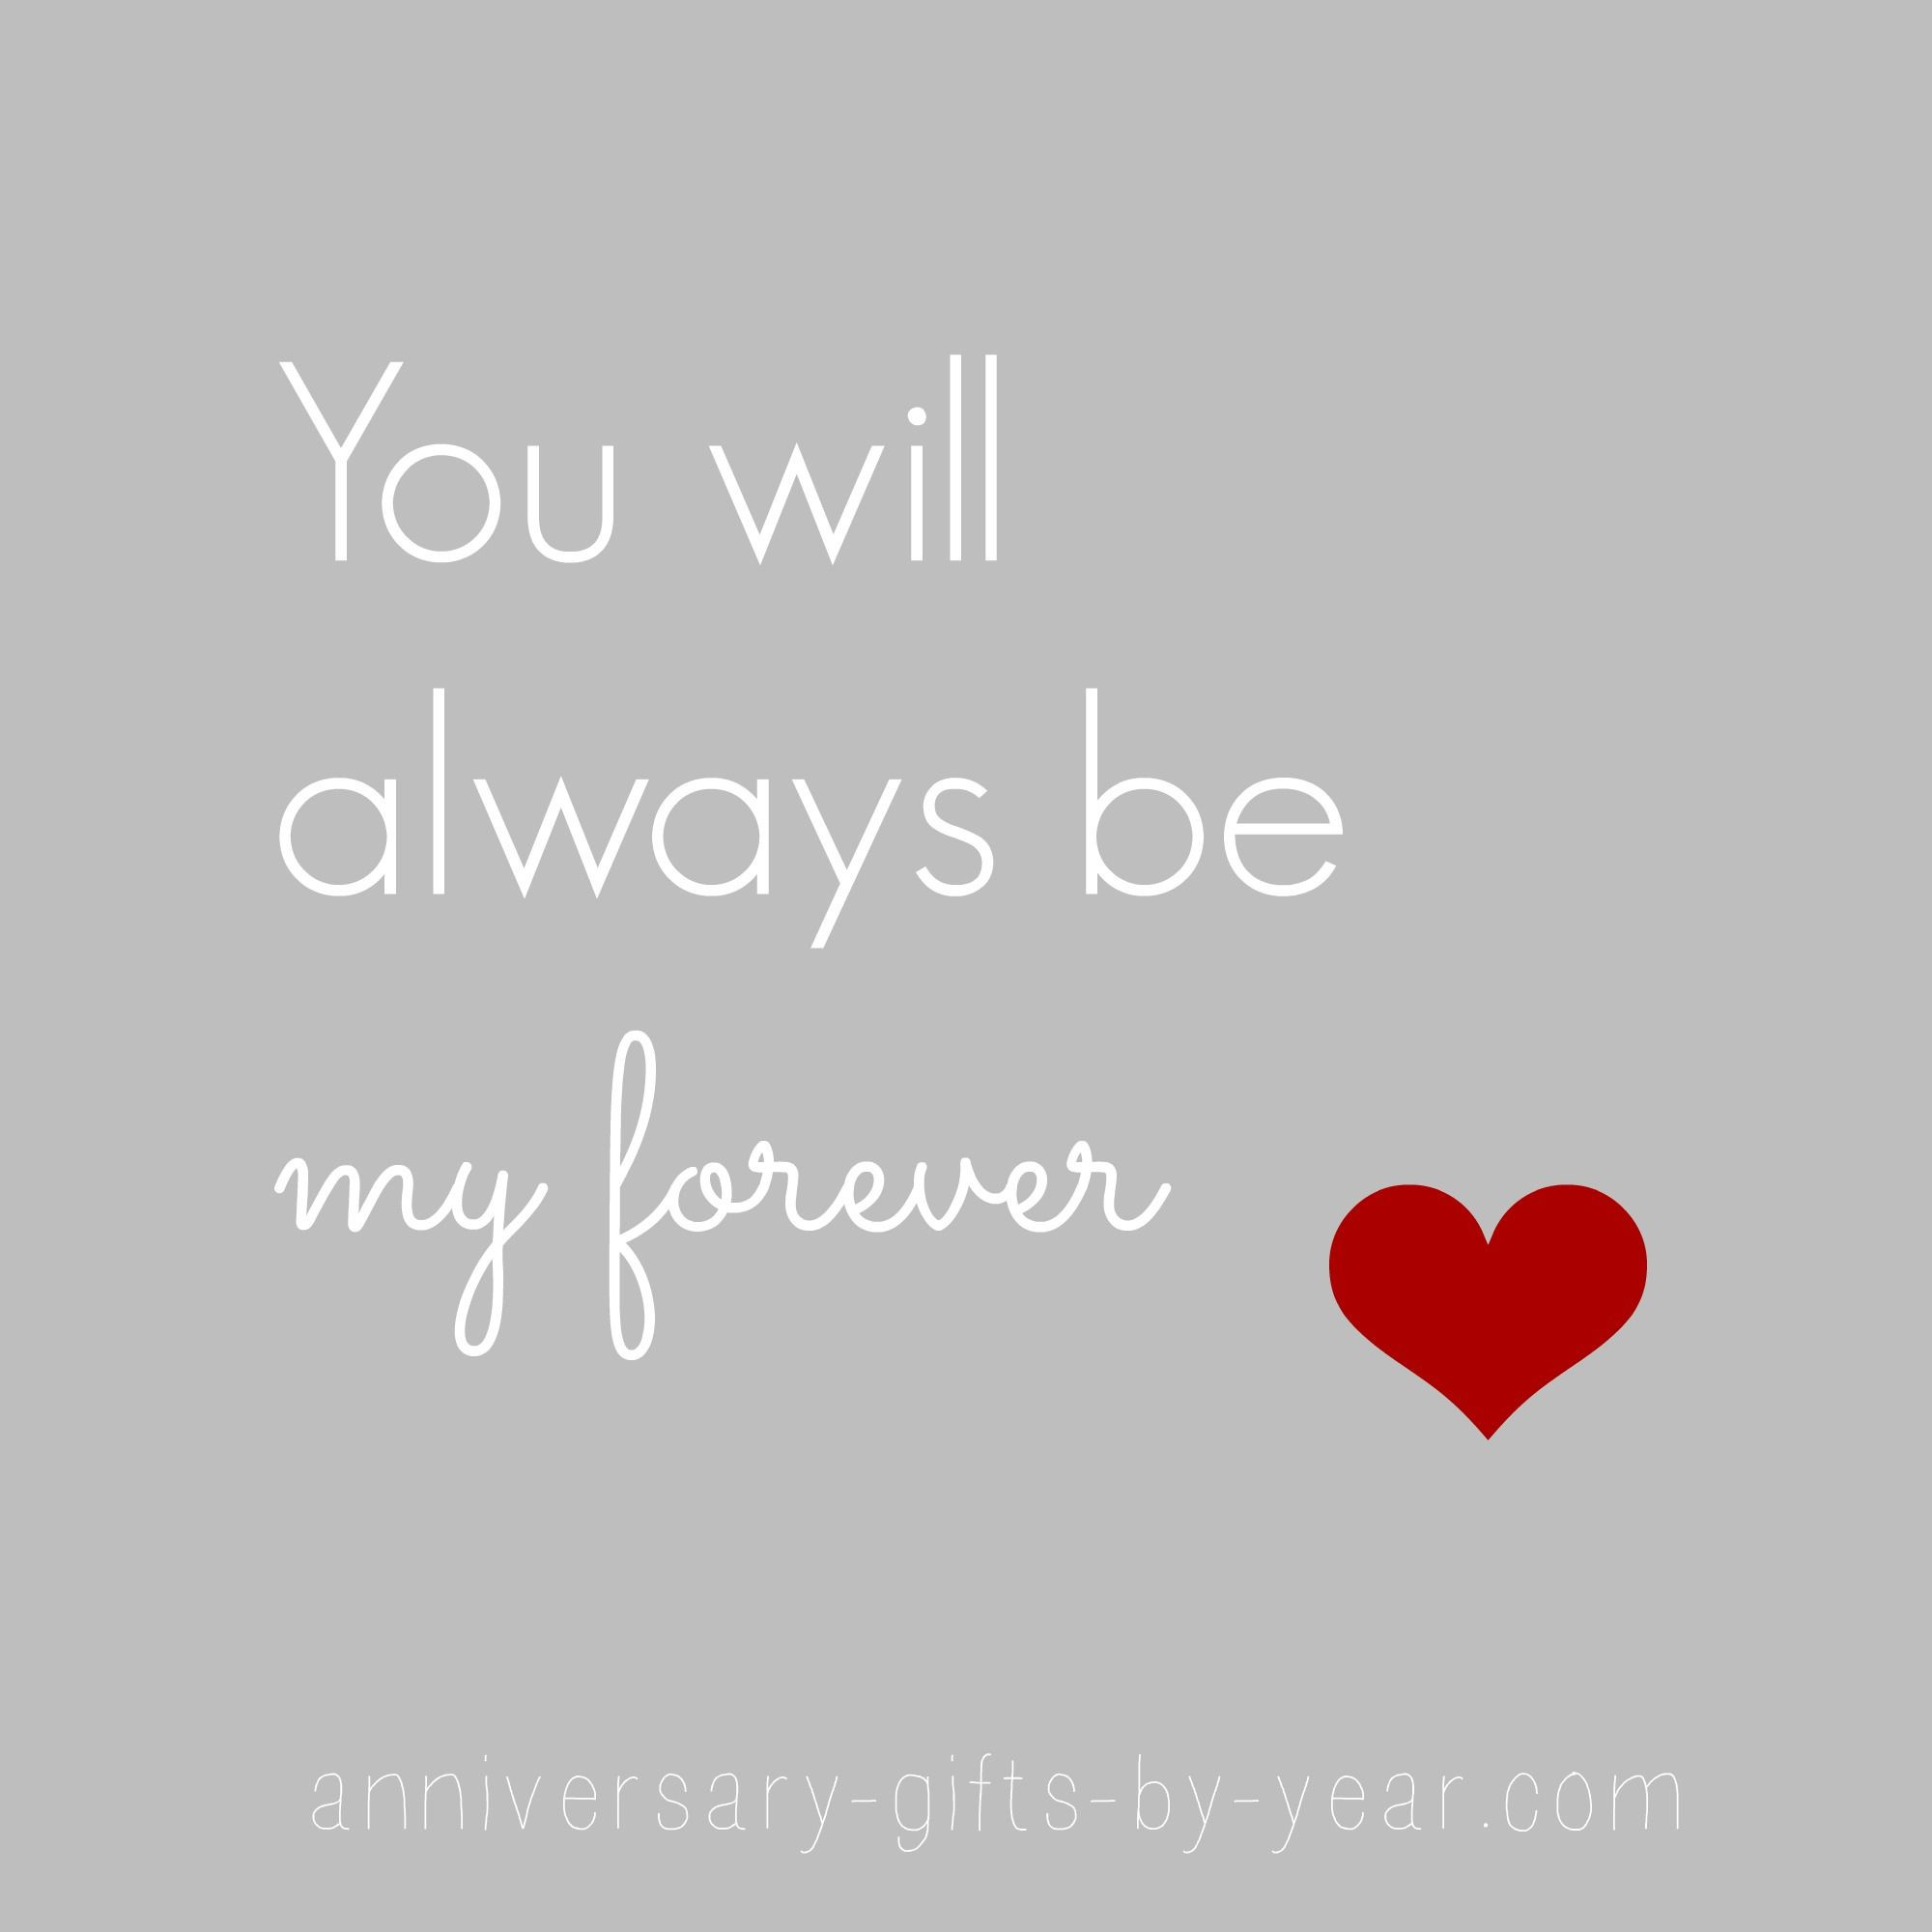 Love Quotes For Anniversary
 The 25 best Happy anniversary my love ideas on Pinterest